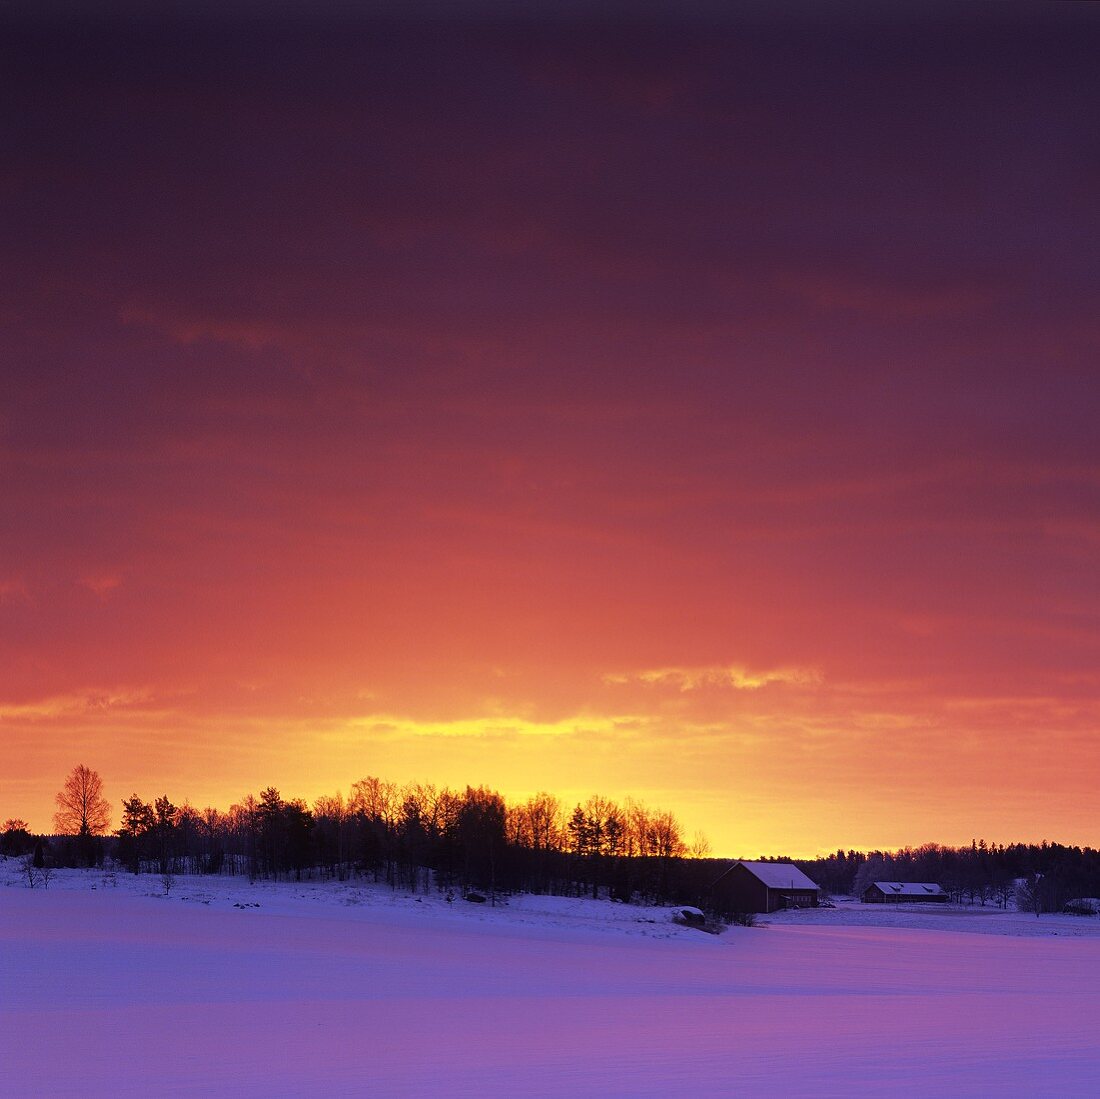 Sunset behind a snow covered landscape